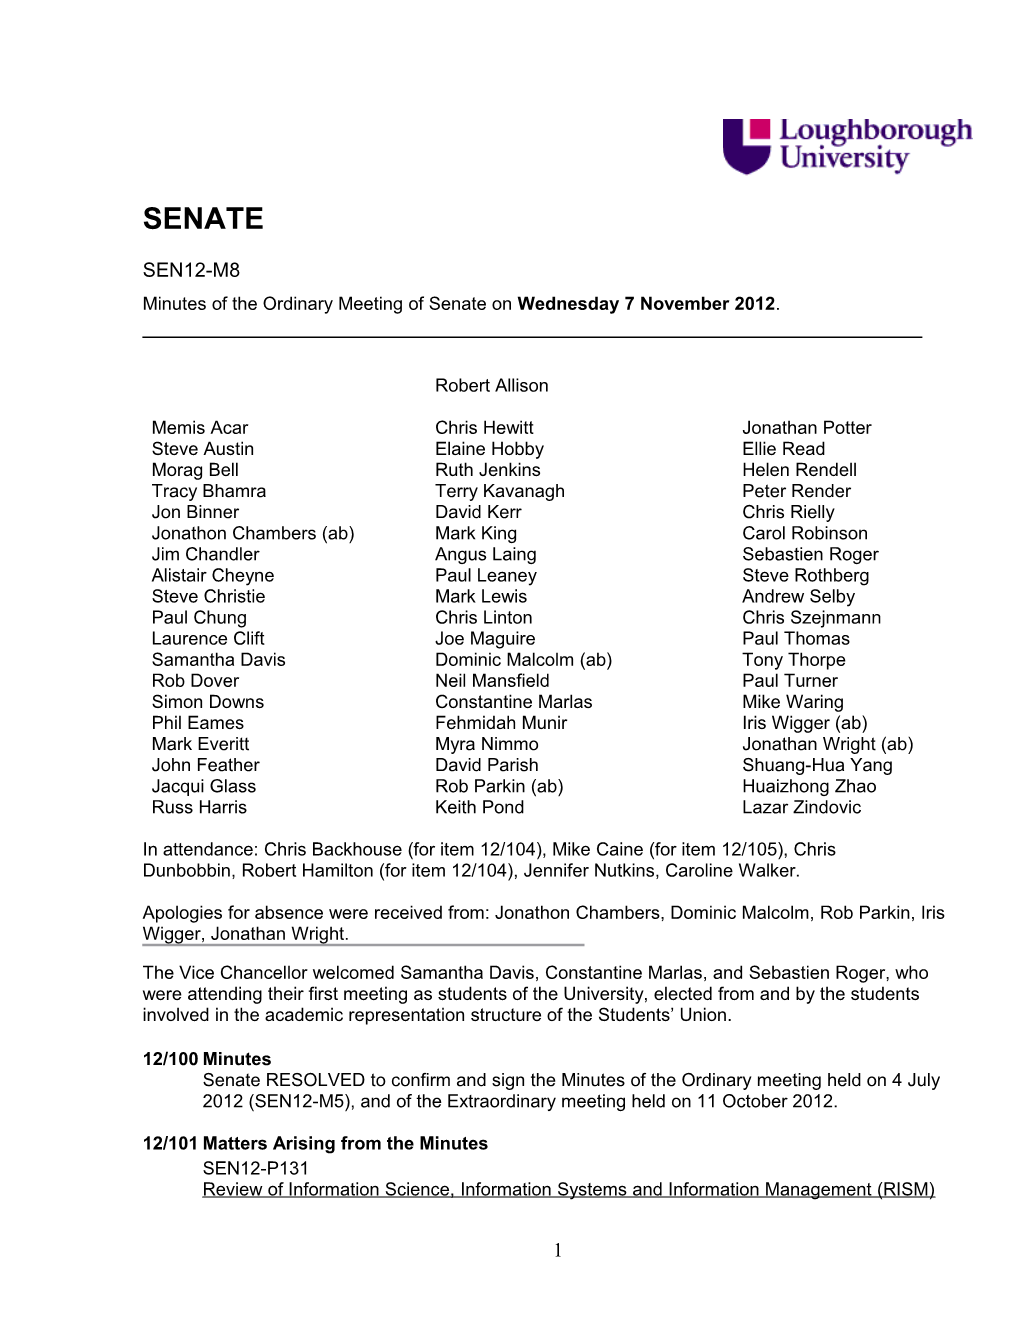 Minutes of the Ordinary Meeting of Senate on Wednesday 7 November 2012